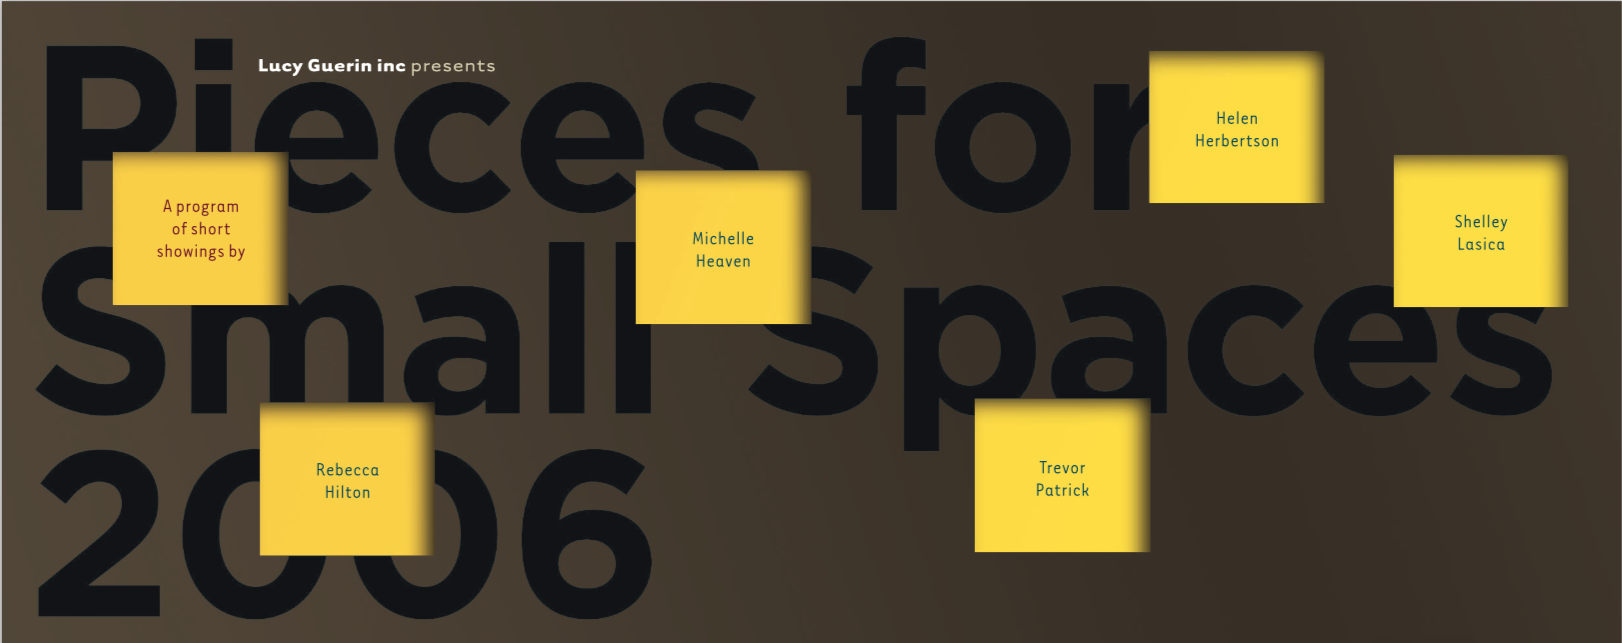 Poster for Pieces for Small Spaces 2006 with text in small yellow squares on a dark brown background